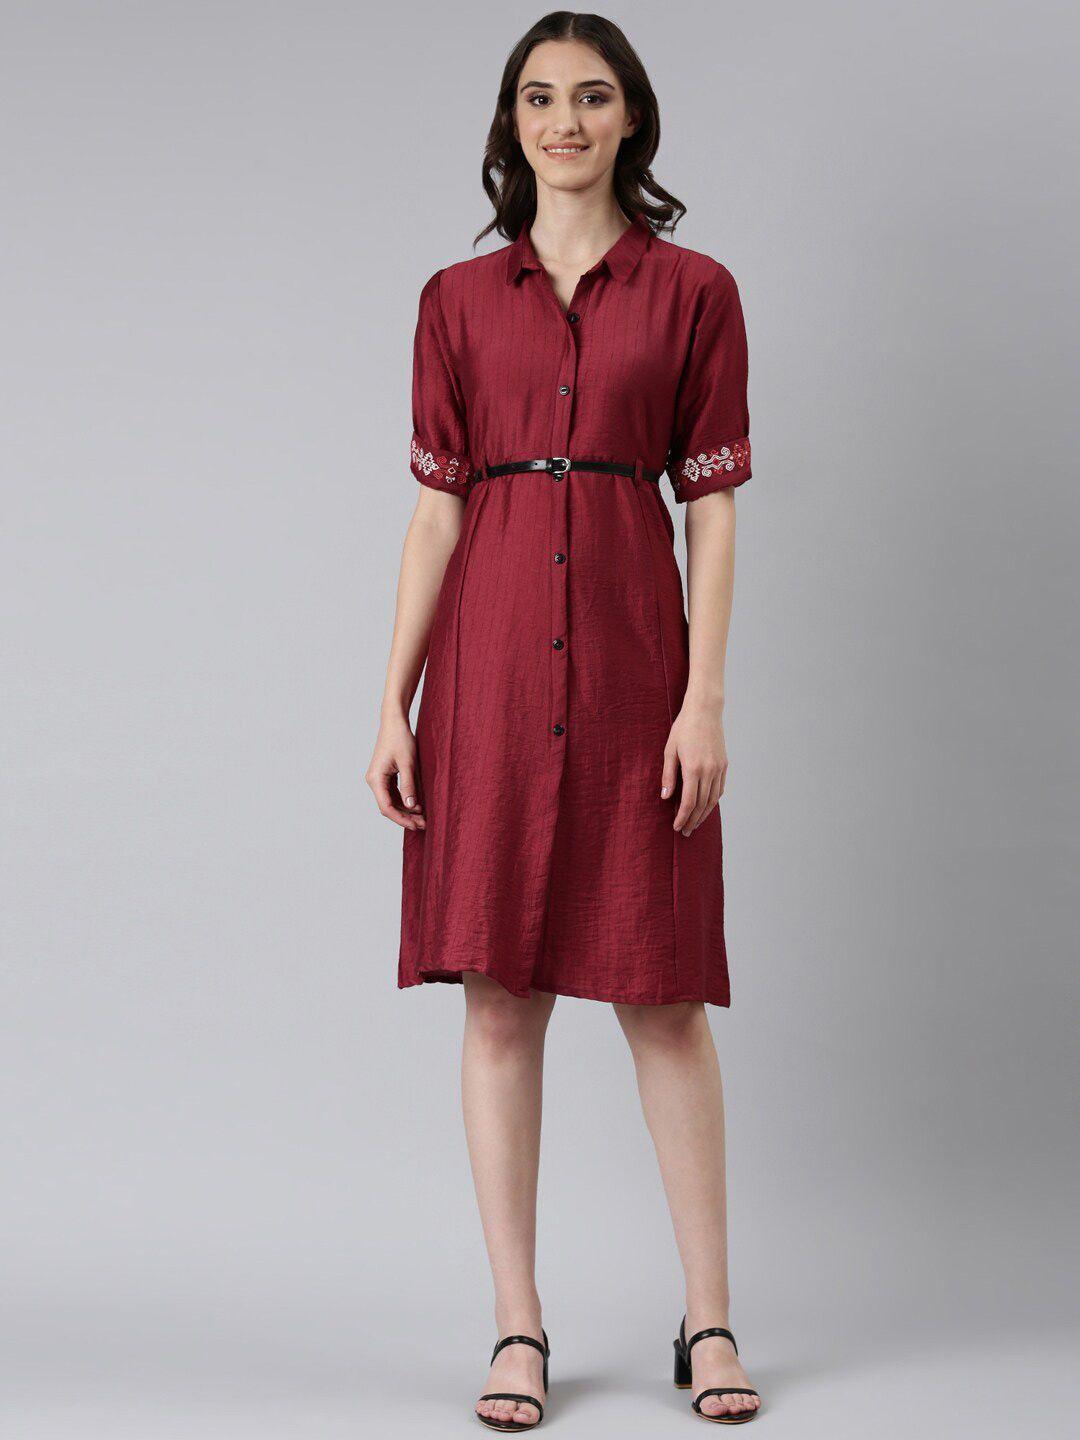 showoff striped shirt collar roll-up sleeves embroidered cotton shirt style dress